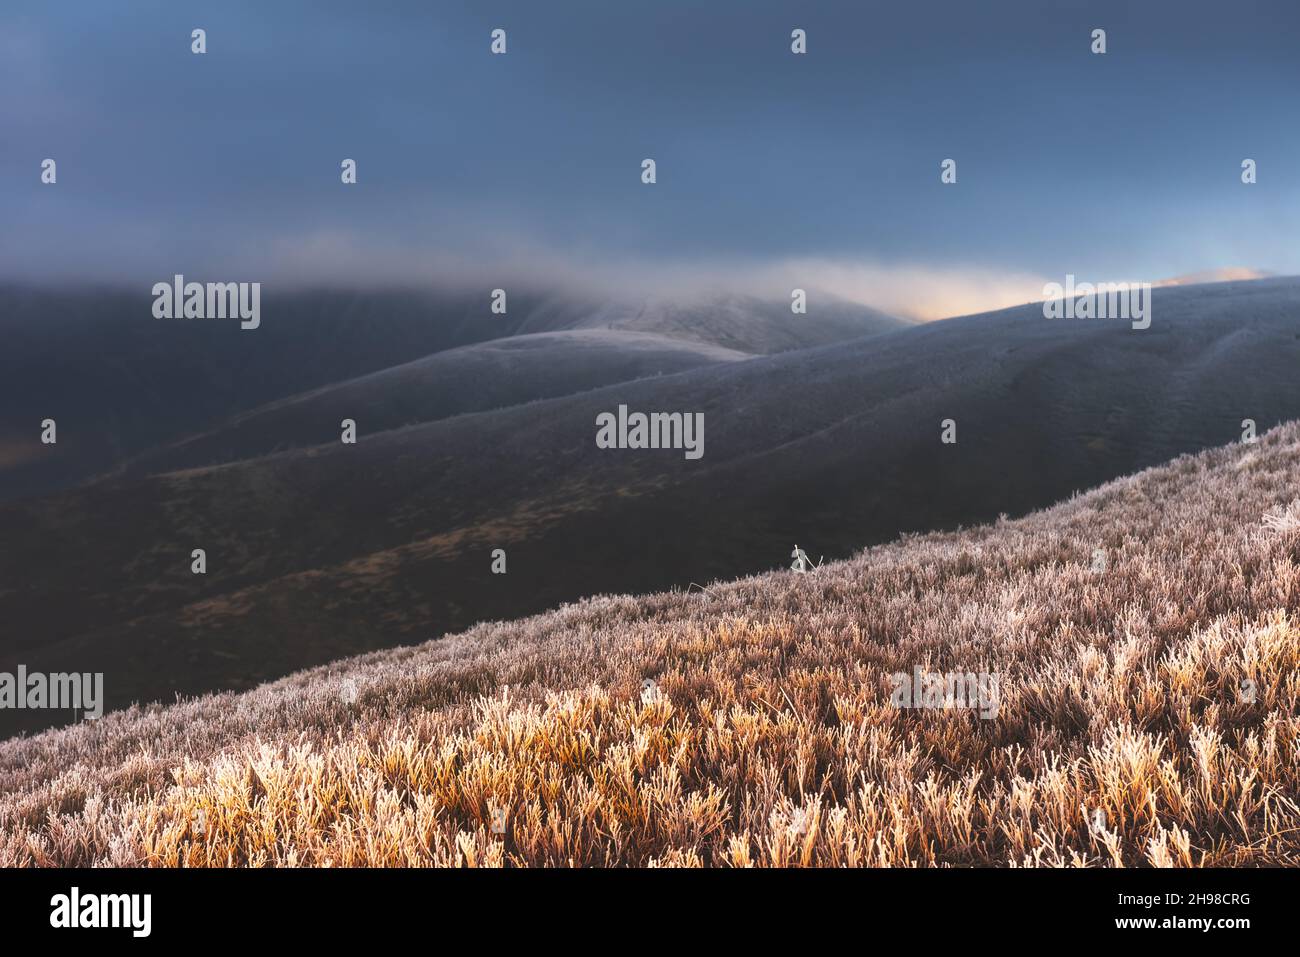 Fantastic autumn landscape with hoarfrost and grassy hills in Carpathian mountains Stock Photo